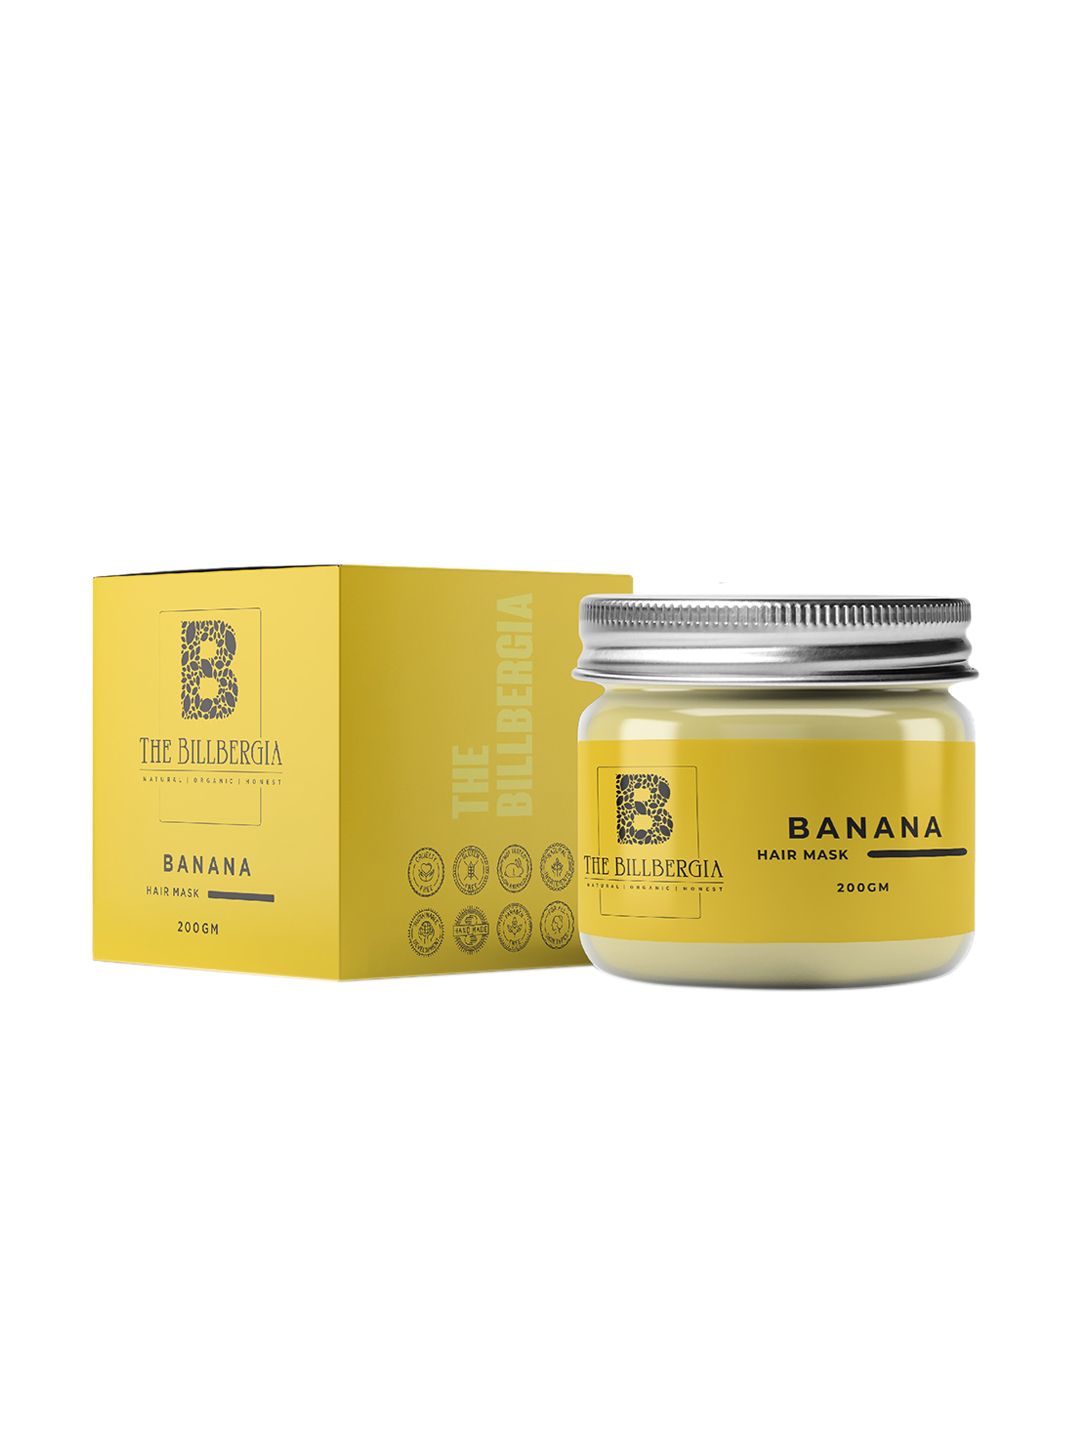 THE BILLBERGIA Banana Hair Mask with Glycerin 200 g Price in India